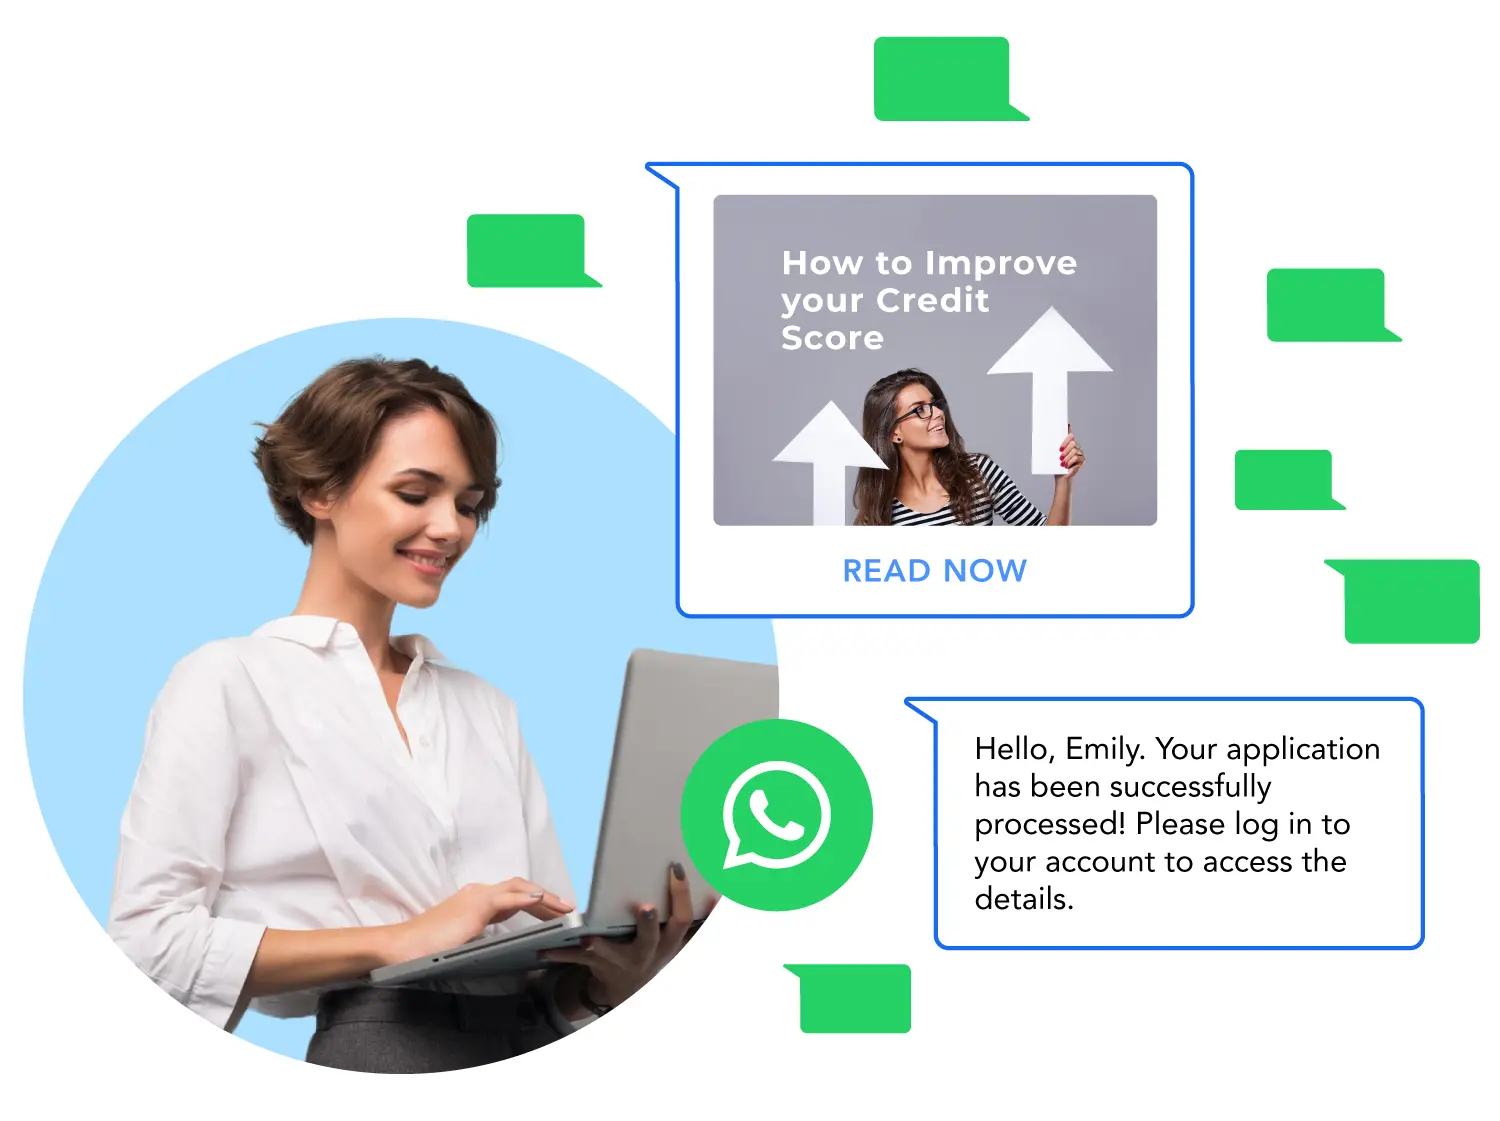 Disseminate important announcements, account-related notifications using the WhatsApp Business API